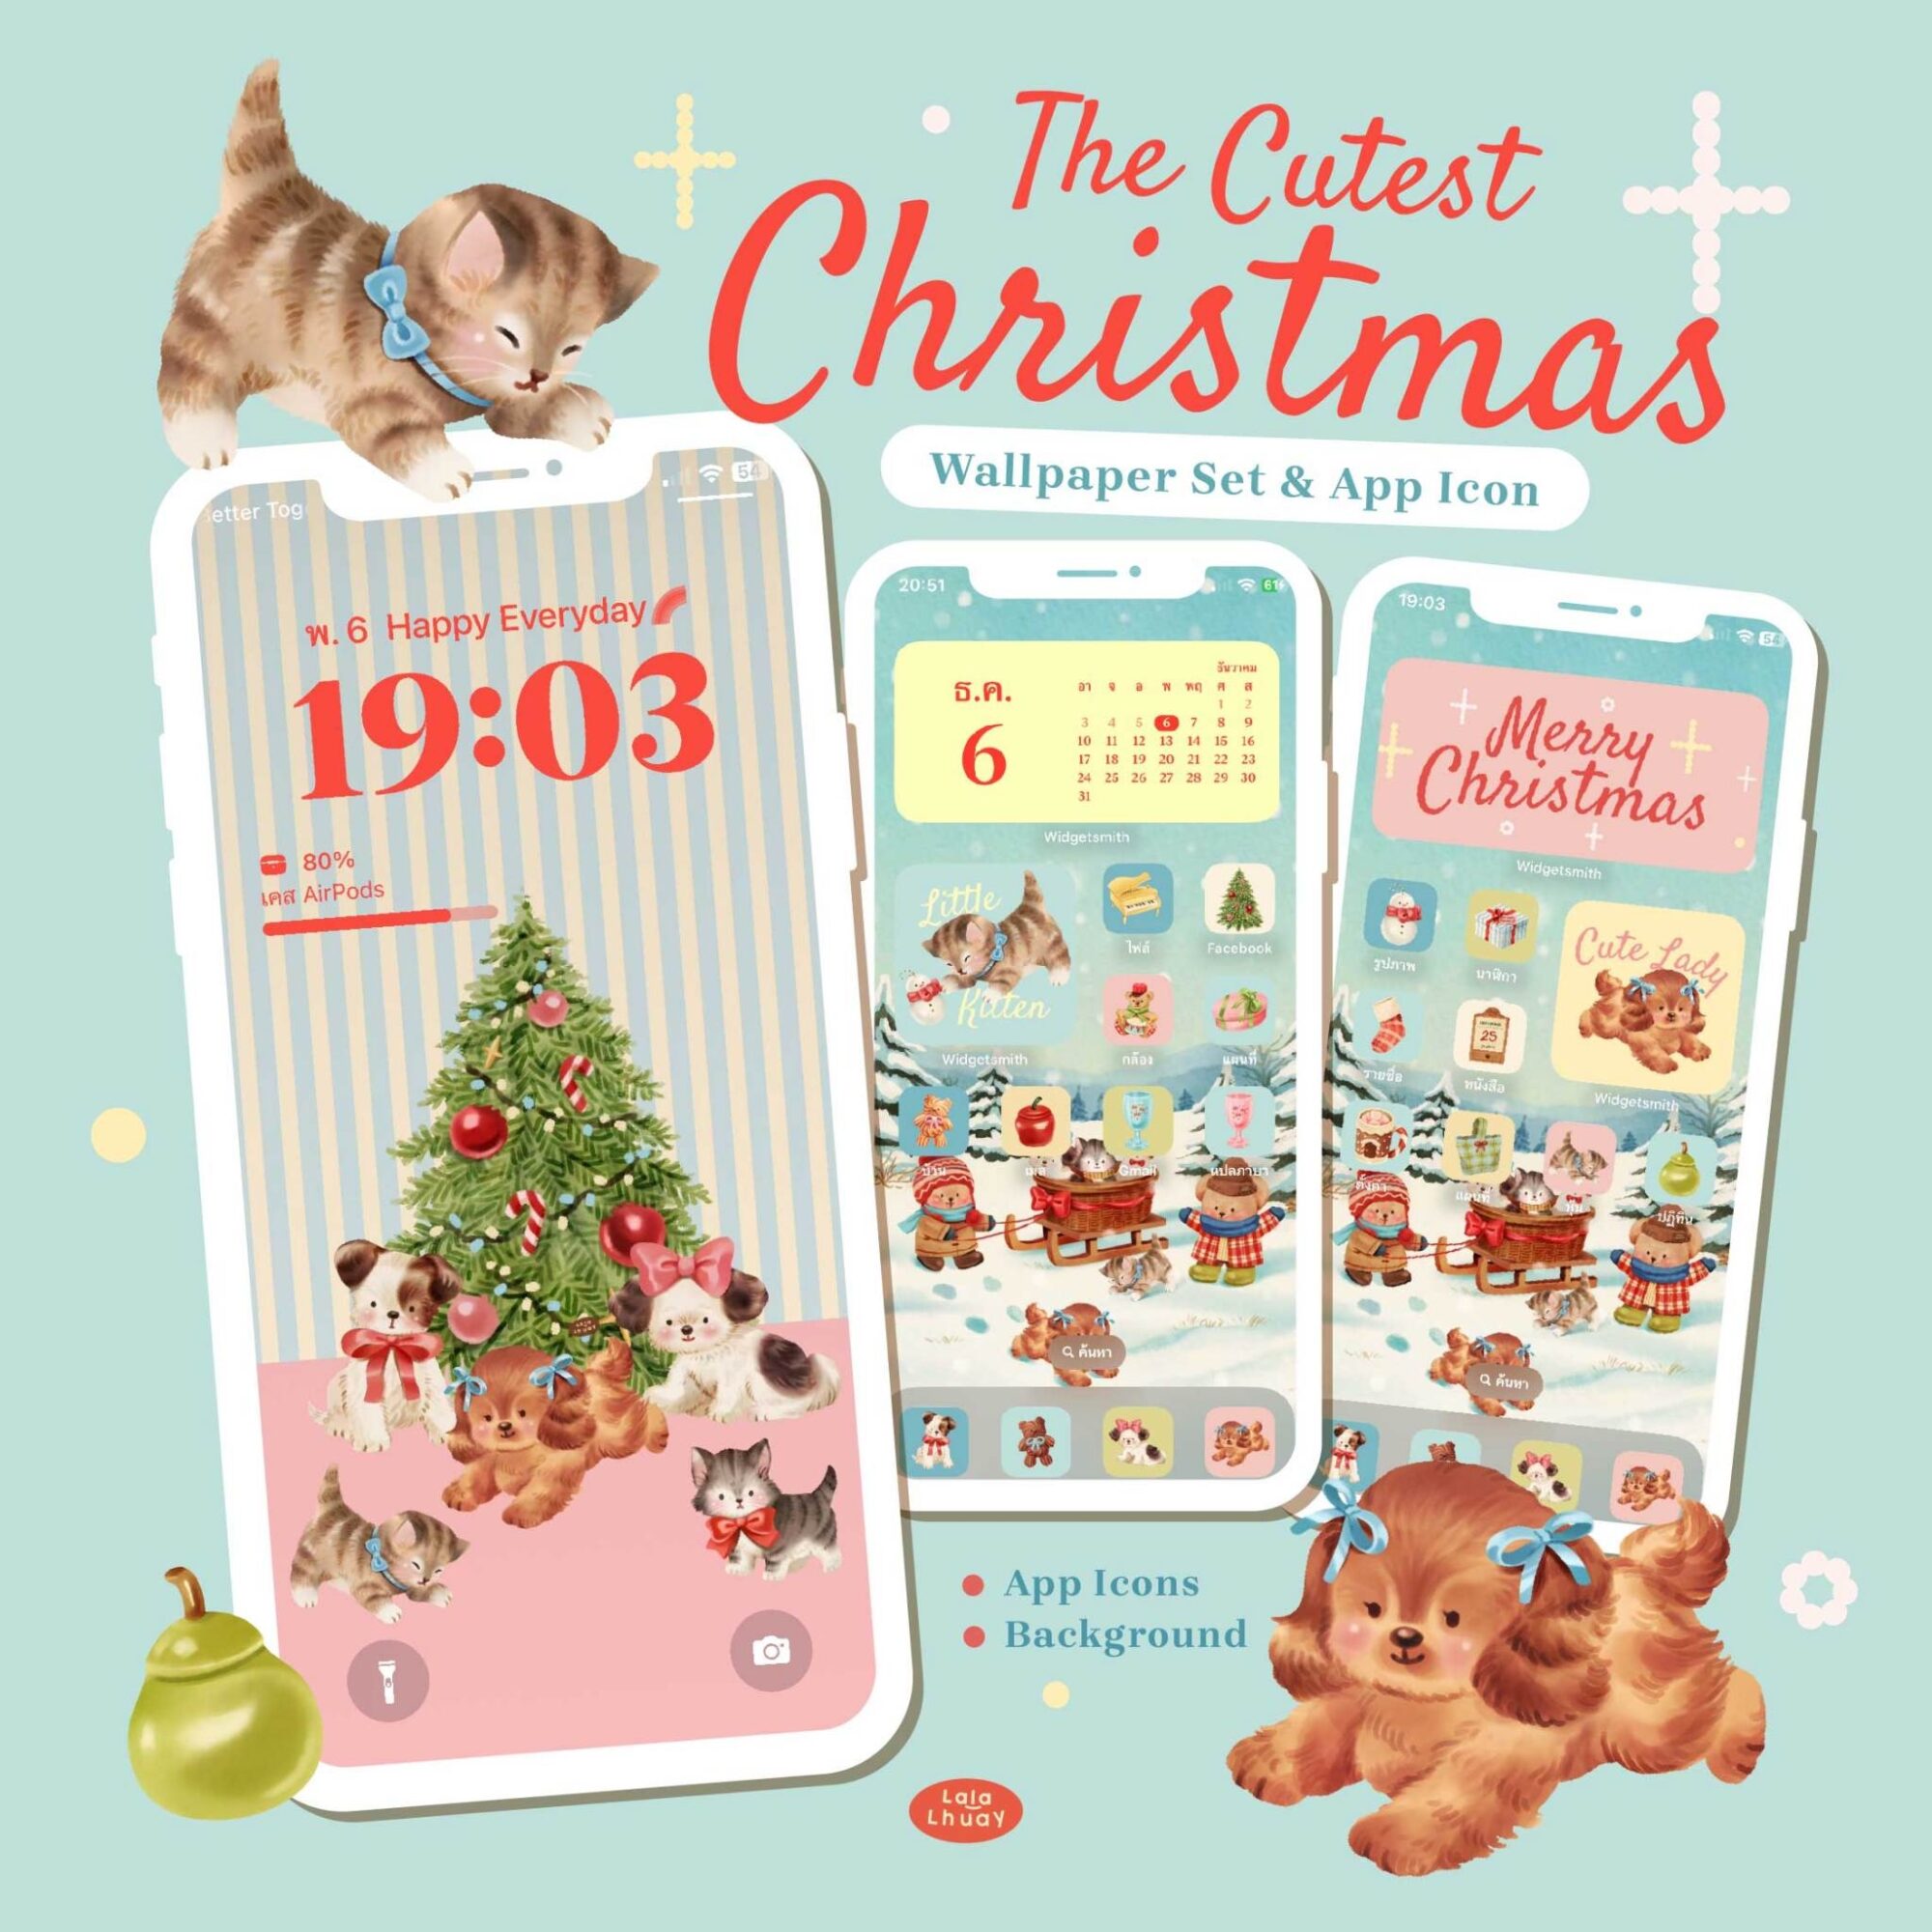 Content_Wallpaper_App Icon_The Cutest Christmas-01